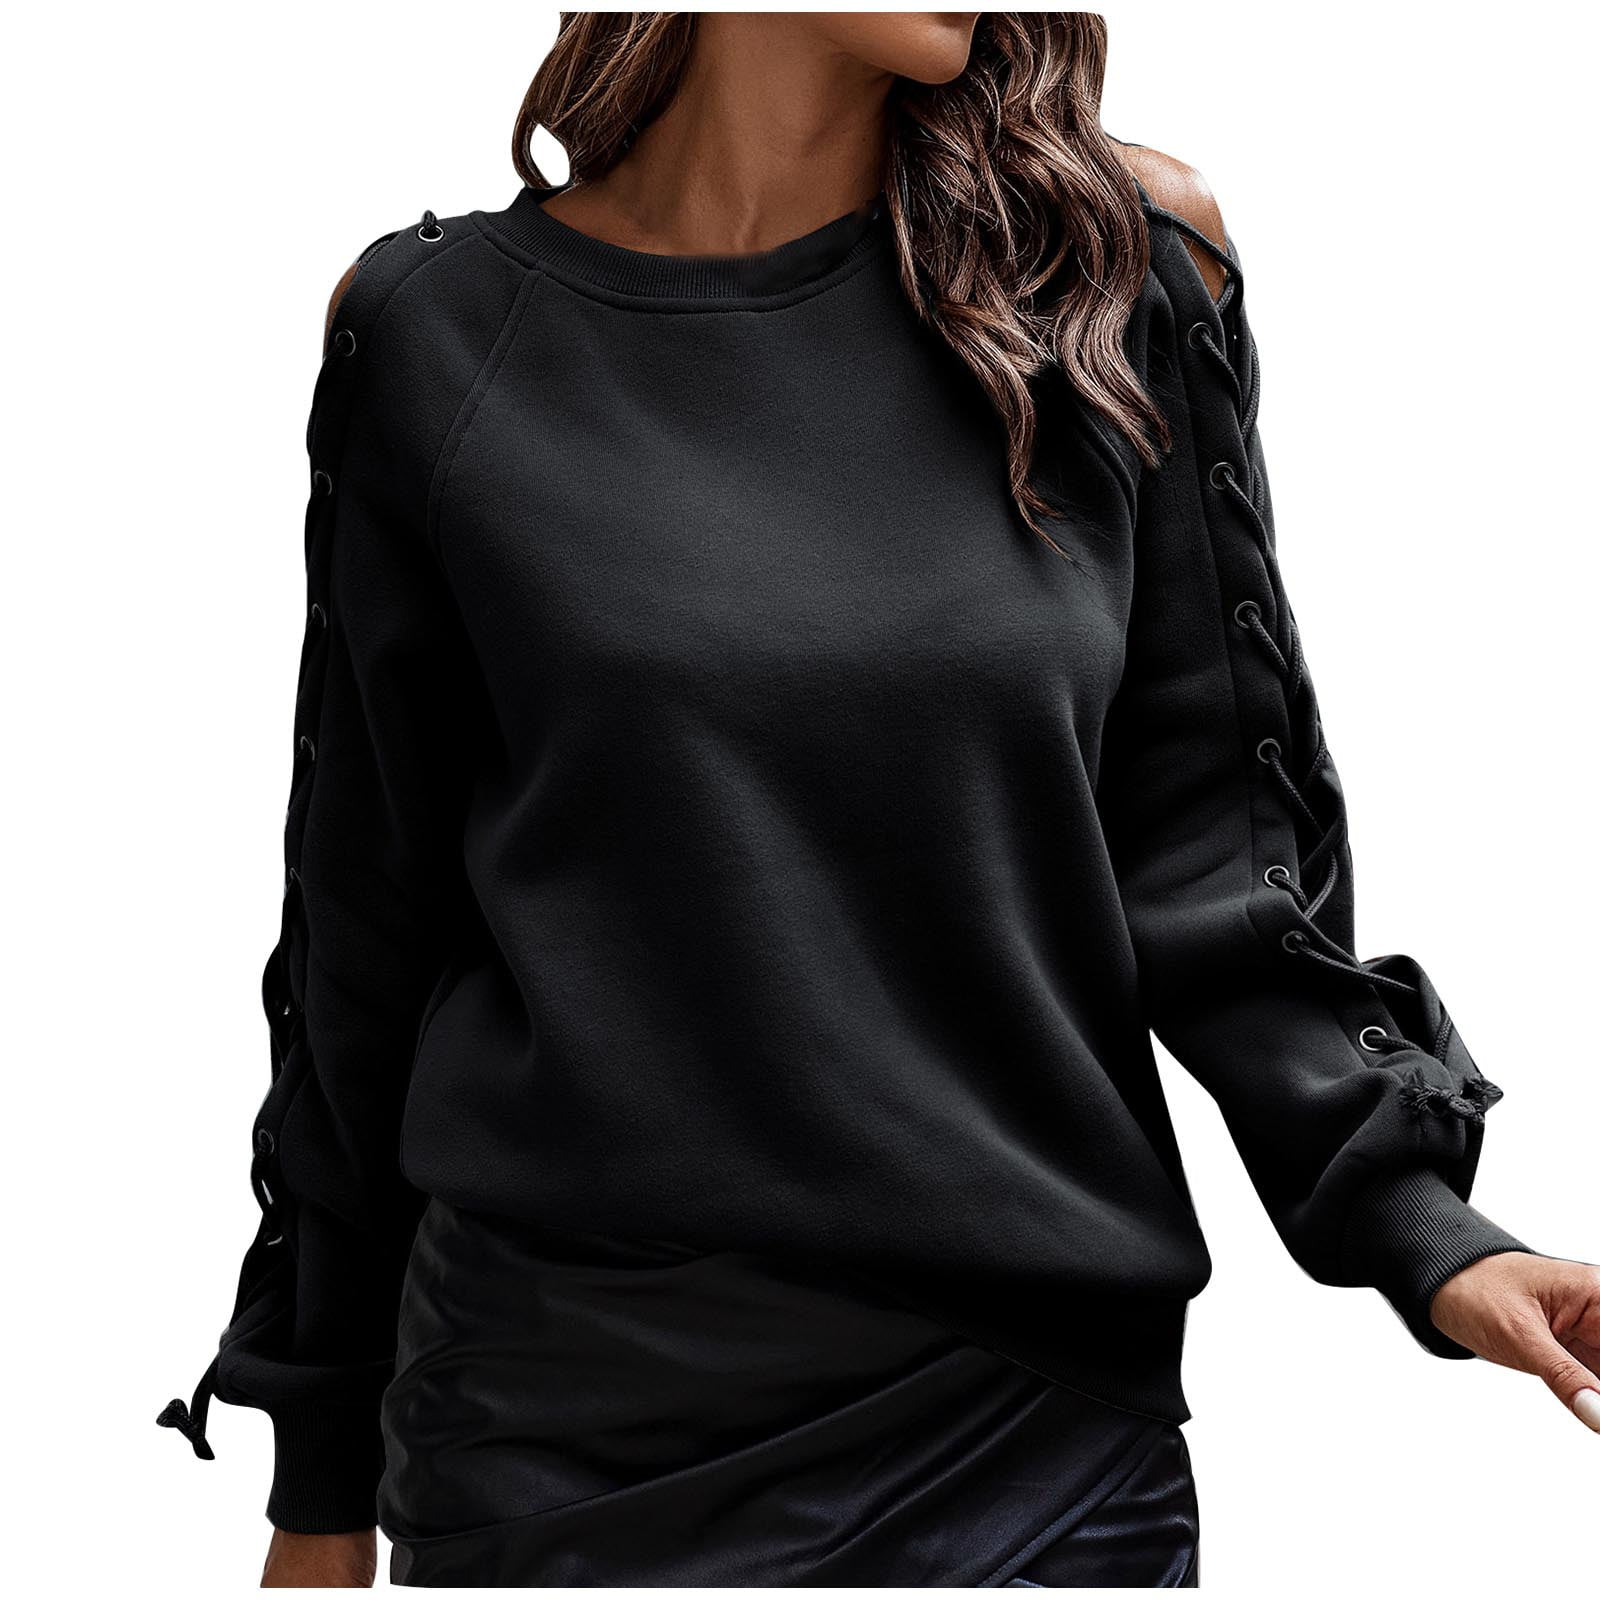 Cathalem Hot Style Women Plus Size Long Sleeve Solid Sweatshirt Hooded Pullover Tops Shirt 